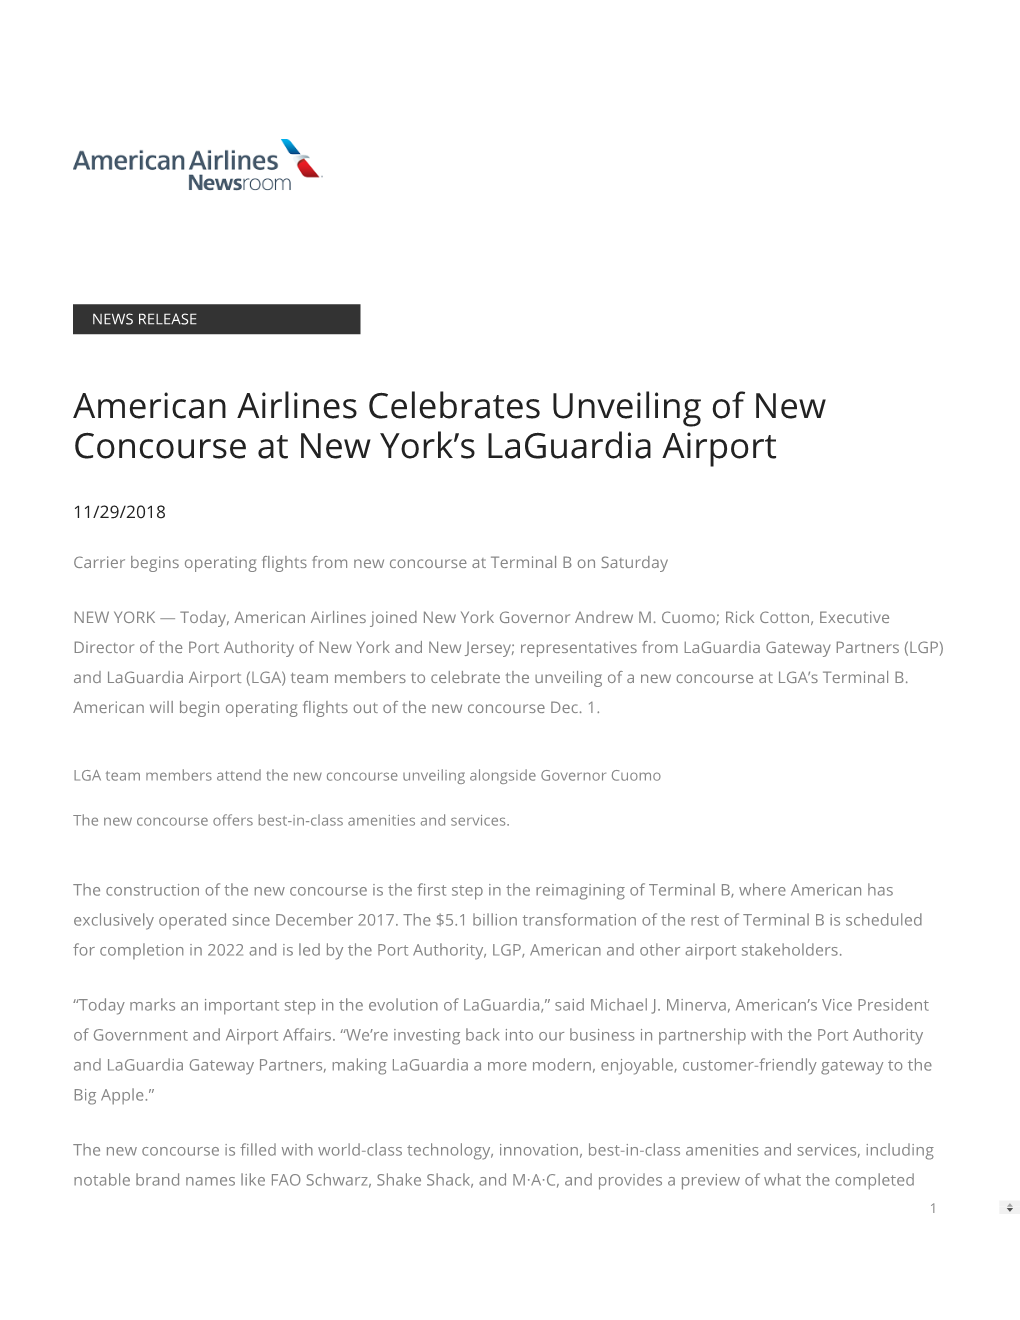 American Airlines Celebrates Unveiling of New Concourse at New York’S Laguardia Airport